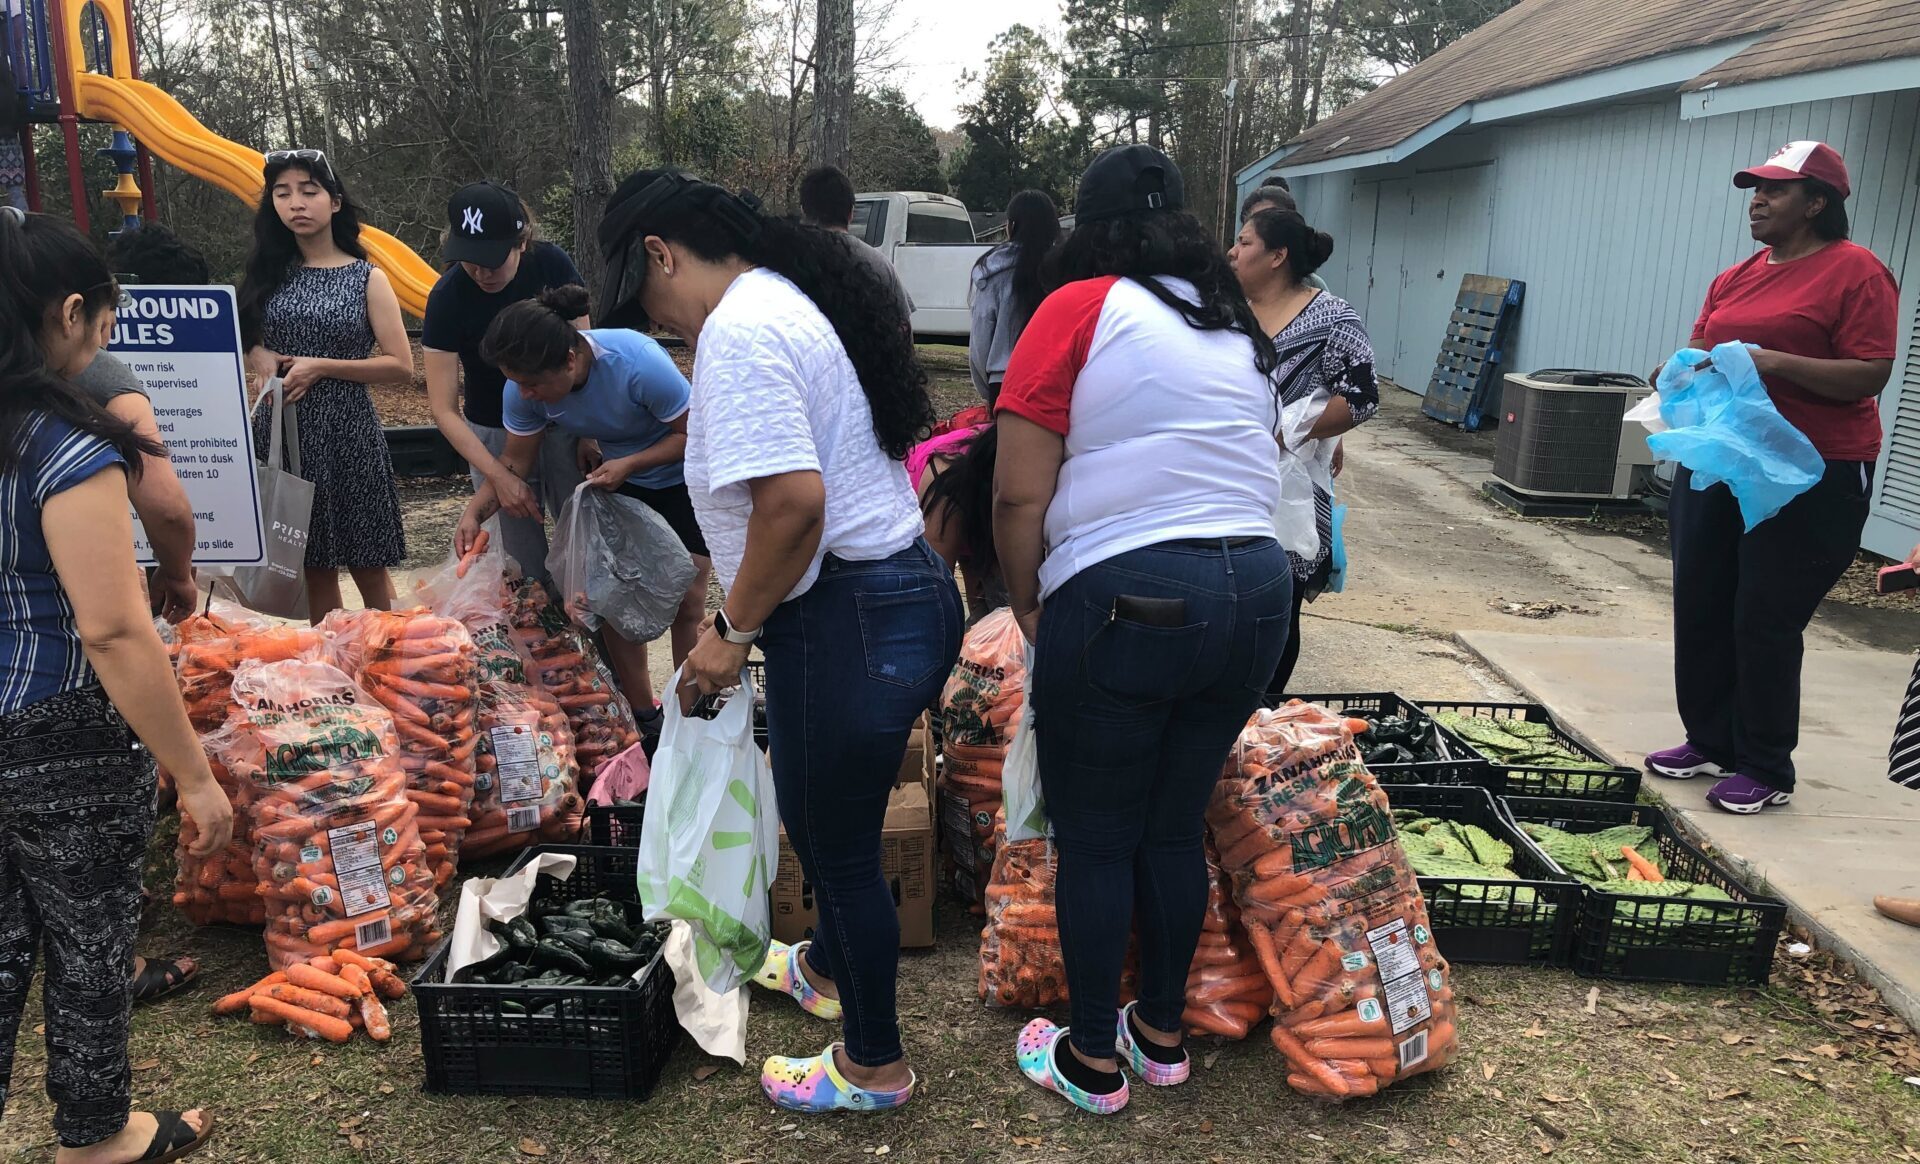 Members of community selecting from a variety of fresh vegetable food donations. Photo credit: Carla Ventura, Expert on Poverty